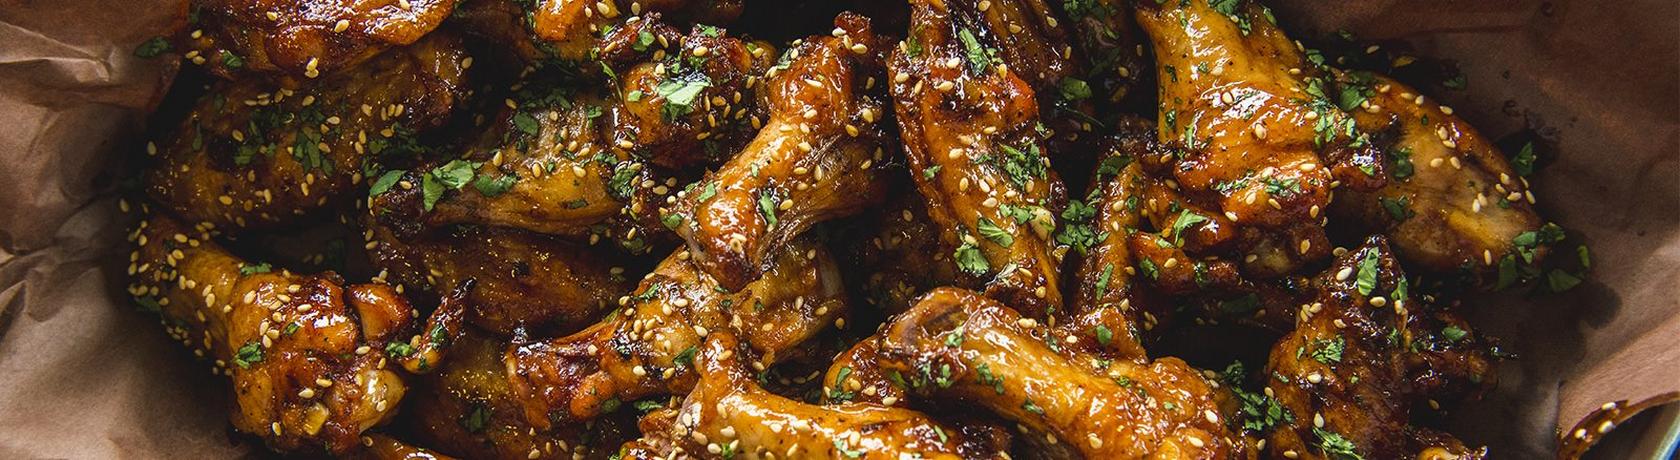 Grilling Chicken Wings: The Ultimate Guide